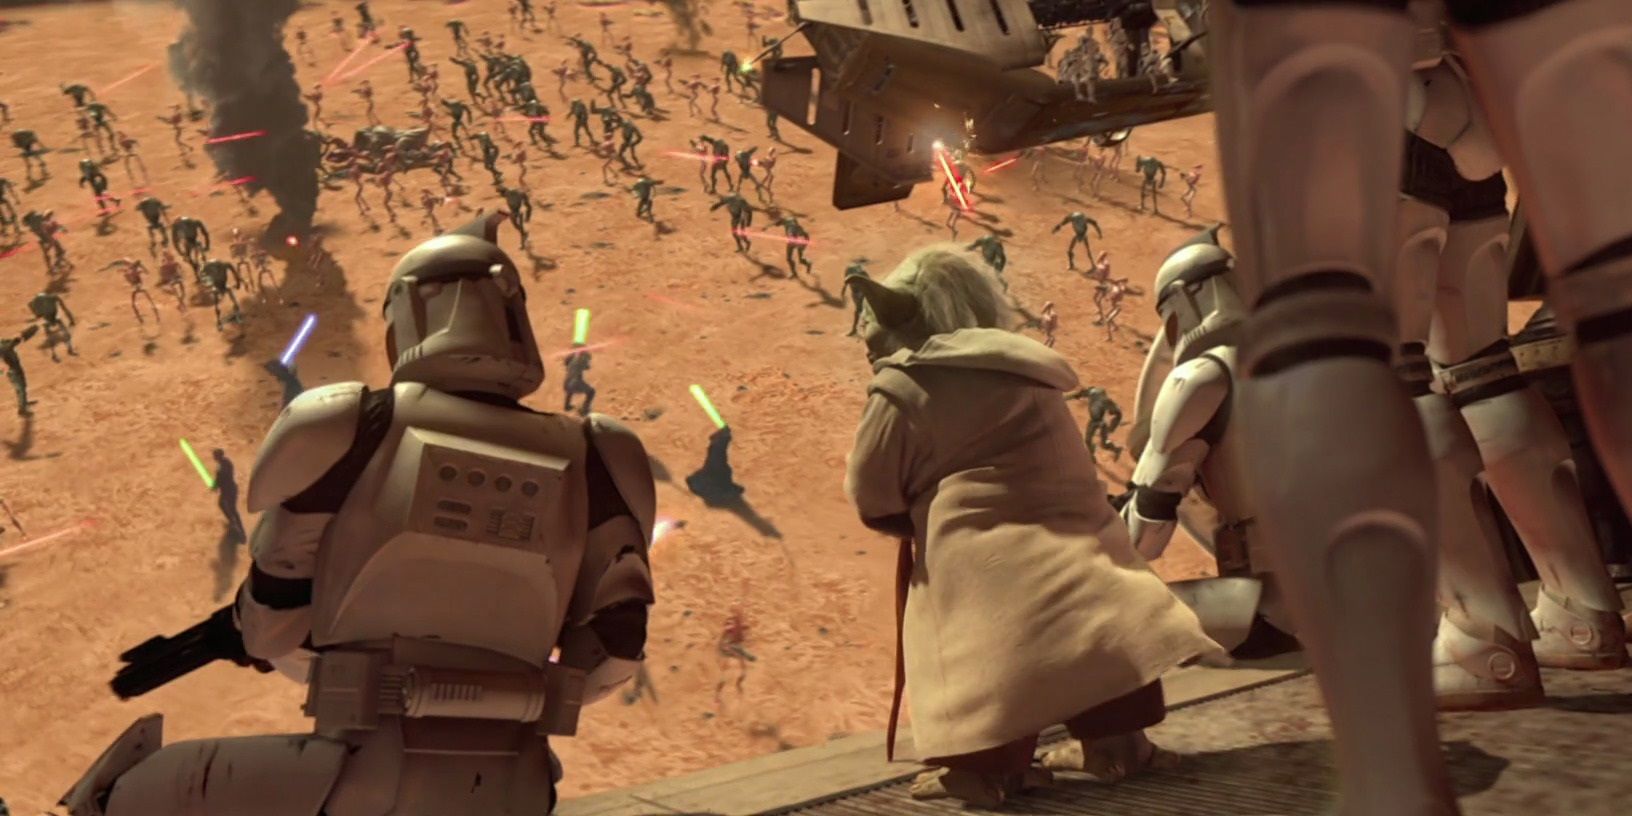 Yoda arrives on Geonosis with the cavalry in Attack of the Clones